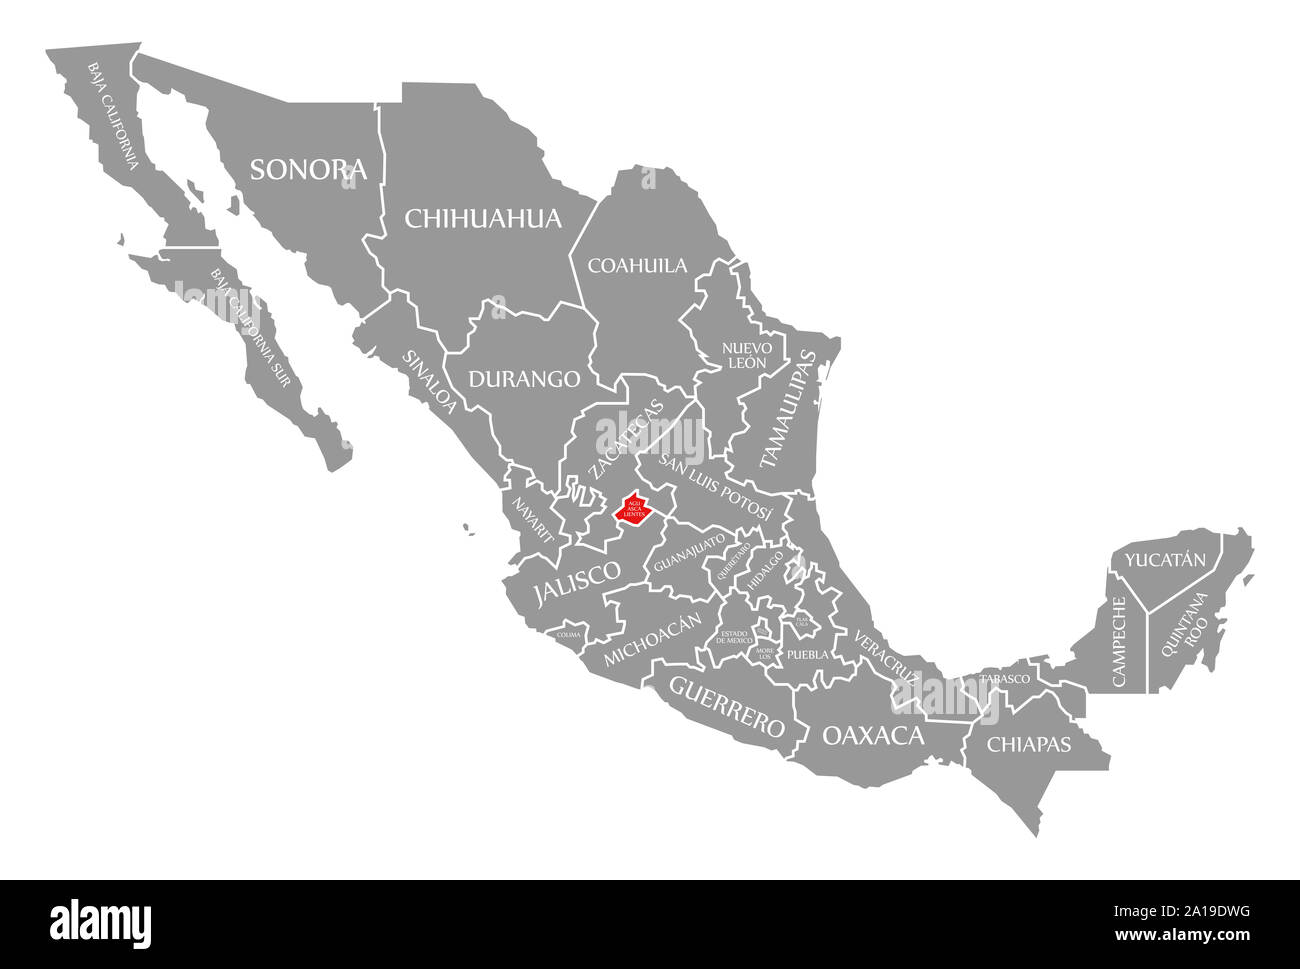 Aguascalientes red highlighted in map of Mexico Stock Photo